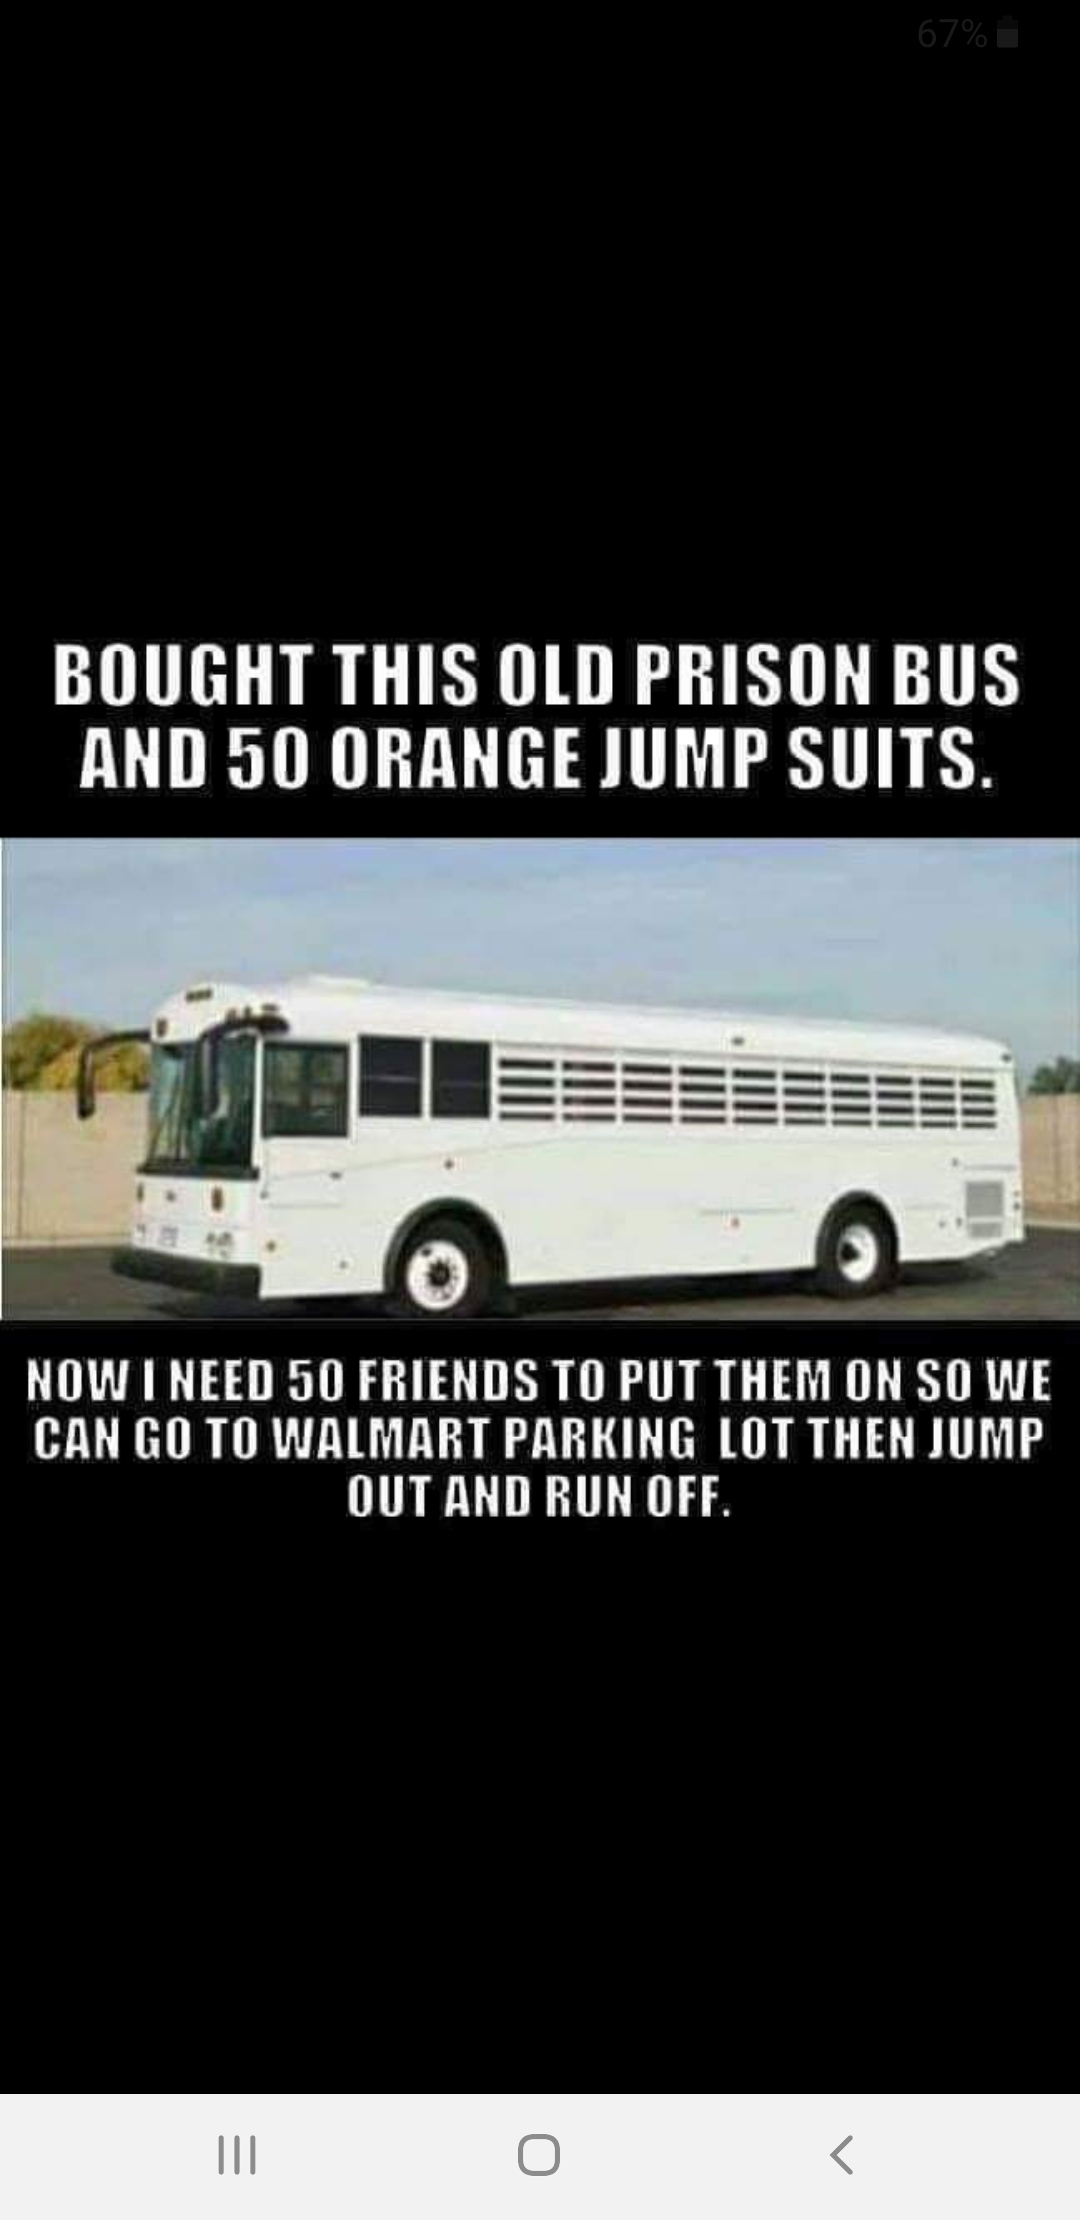 prison meme - 67% i Bought This Old Prison Bus And 50 Orange Jump Suits. Now I Need 50 Friends To Put Them On So We Can Go To Walmart Parking Lot Then Jump Out And Run Off.